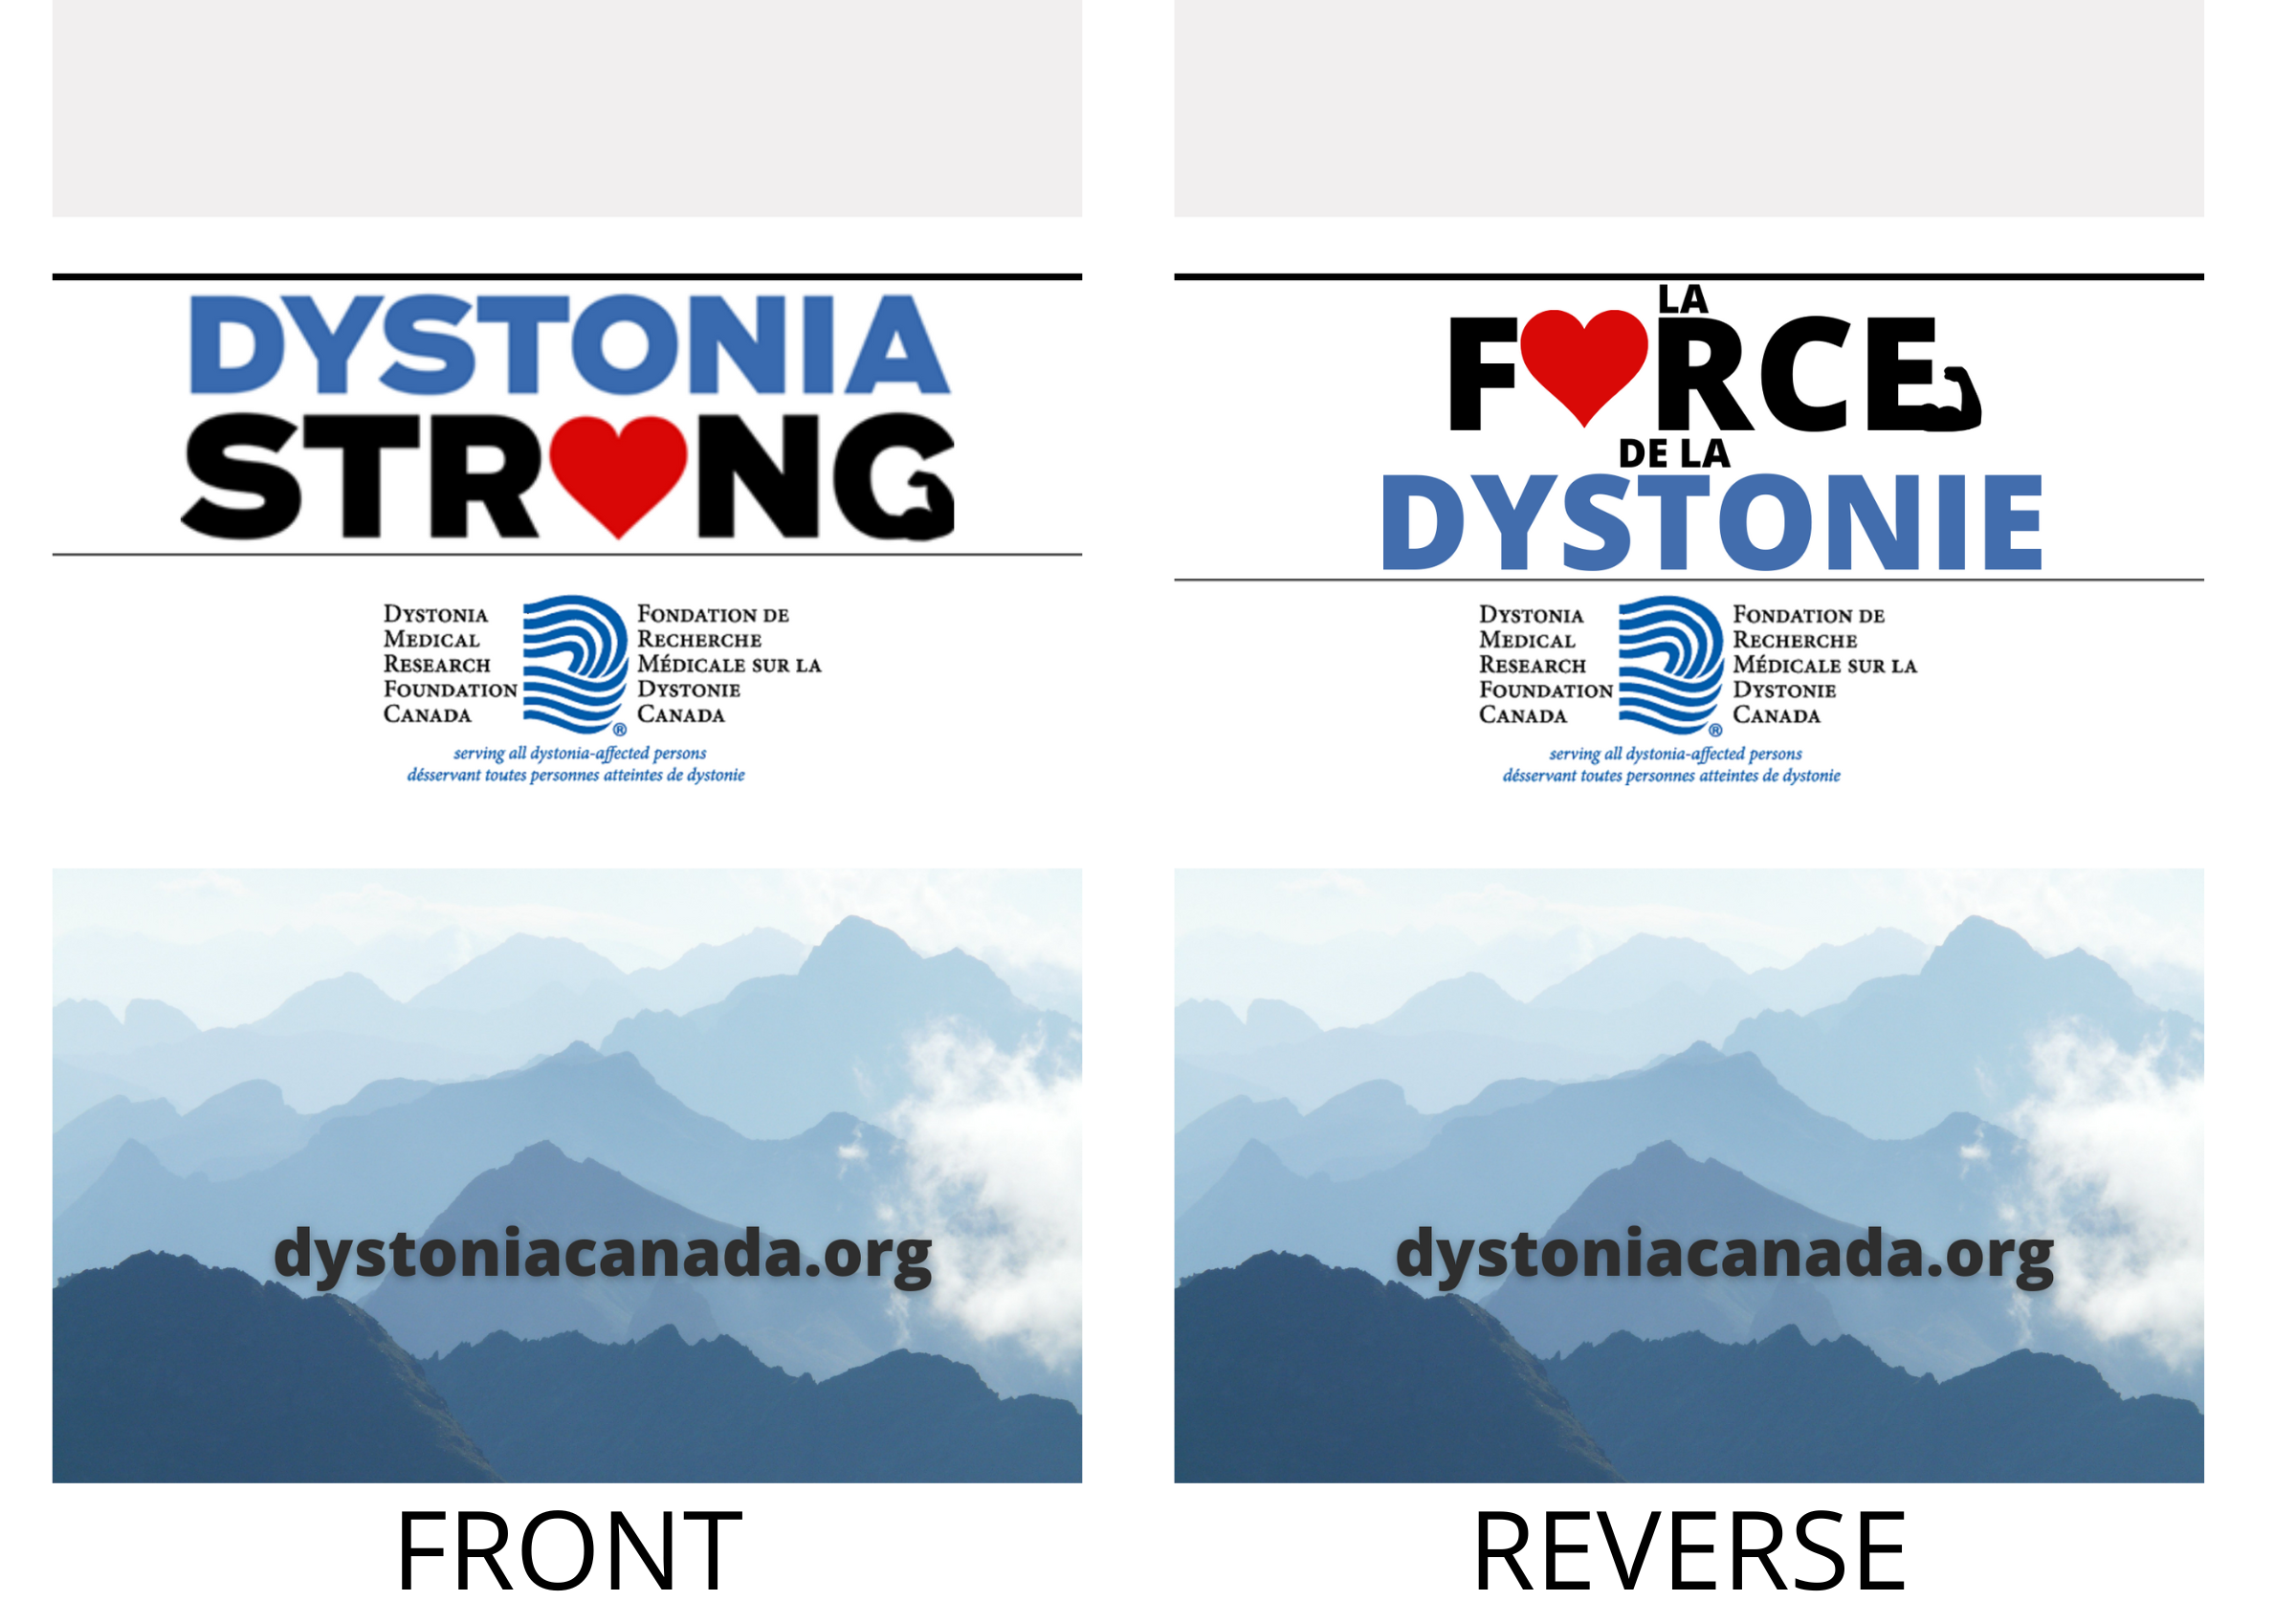 Dystonia strong flag front and reverse sides